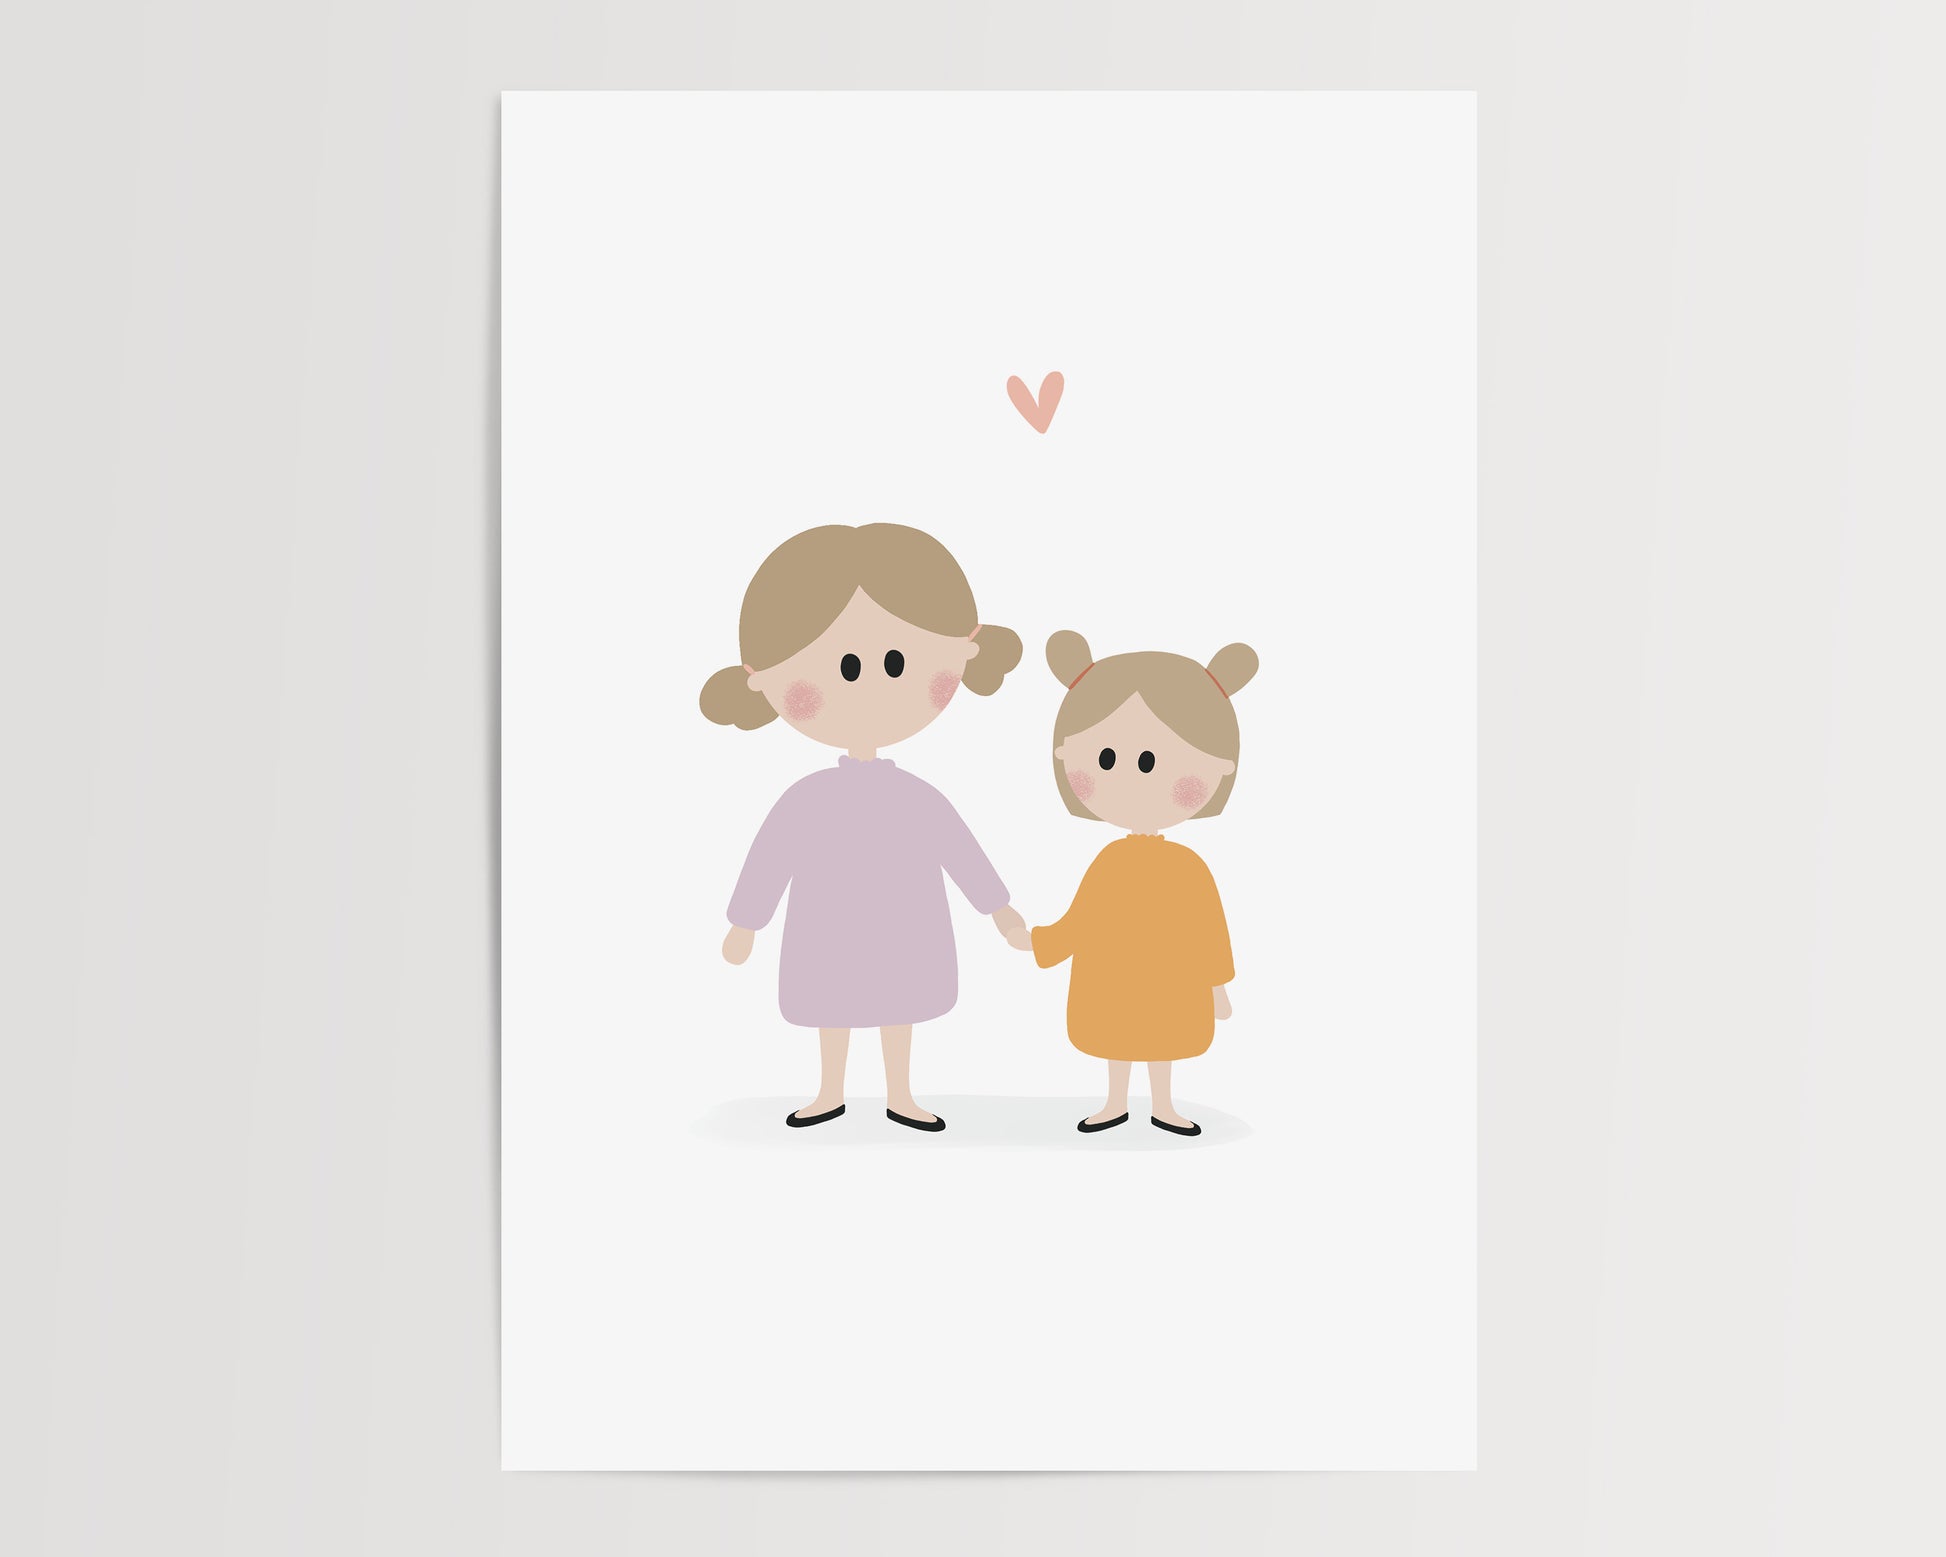 A beautifully illustrated art print featuring little sisters. This poster certainly brings joy and tenderness to your walls with soft pastel colors.